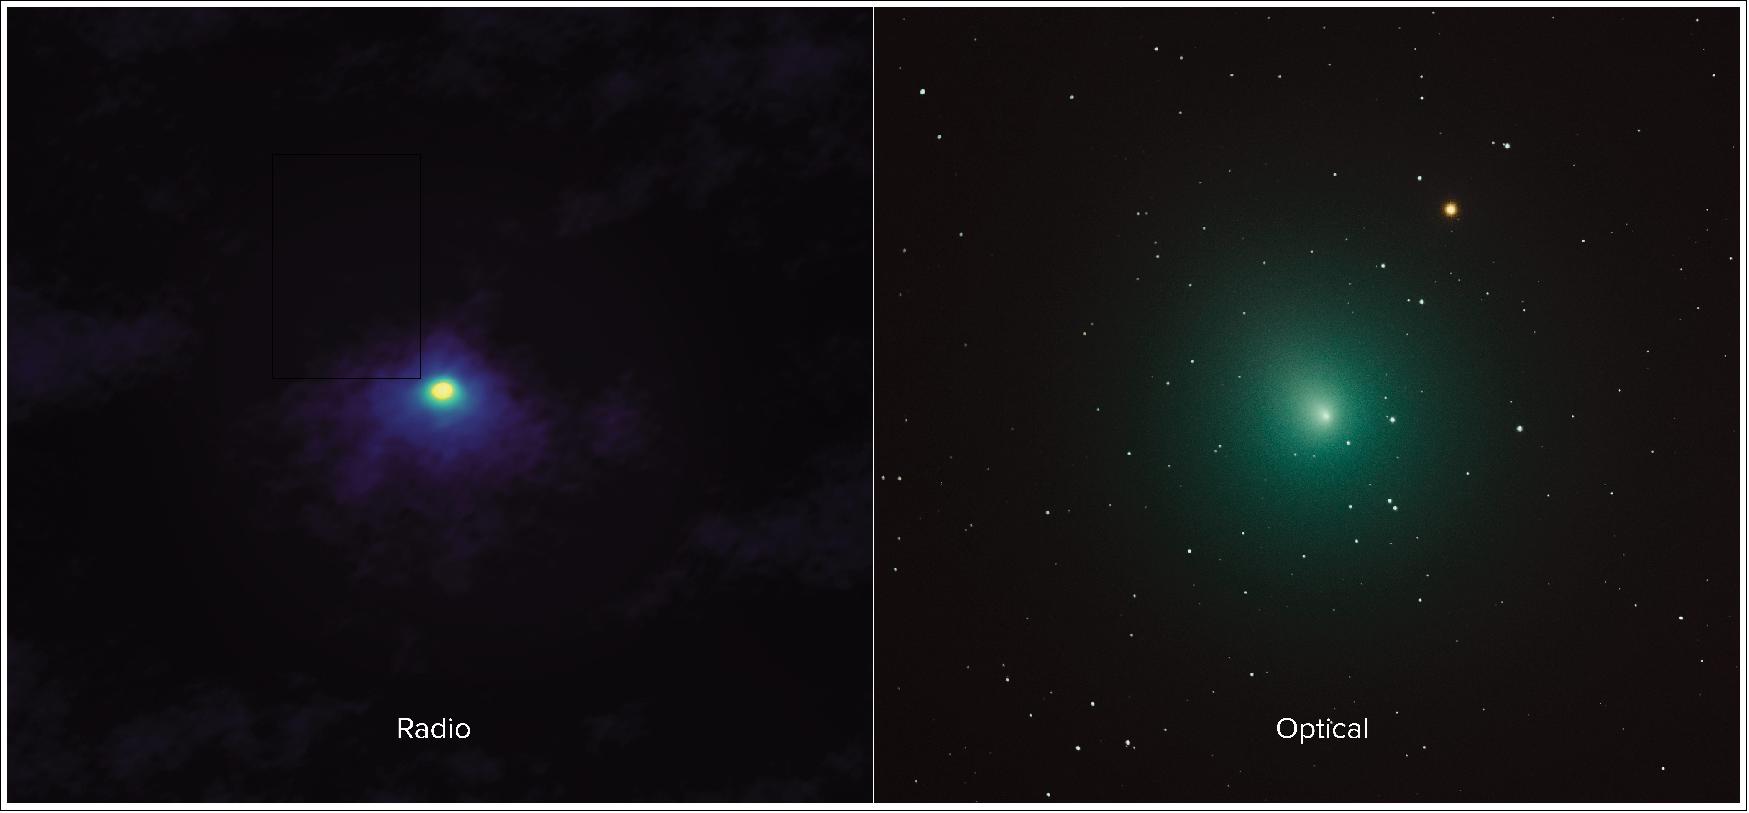 Figure 55: Side-by-side comparison shows an ALMA image of comet 46P/Wirtanen (left) and an optical image (right). The ALMA image has approximately 1000 times the resolution of the optical image and zooms in on the inner portion of the comet's diffuse coma (image credit: ALMA (ESO/NAOJ/NRAO), M. Cordiner, NASA/CUA; Derek Demeter, Emil Buehler Planetarium)